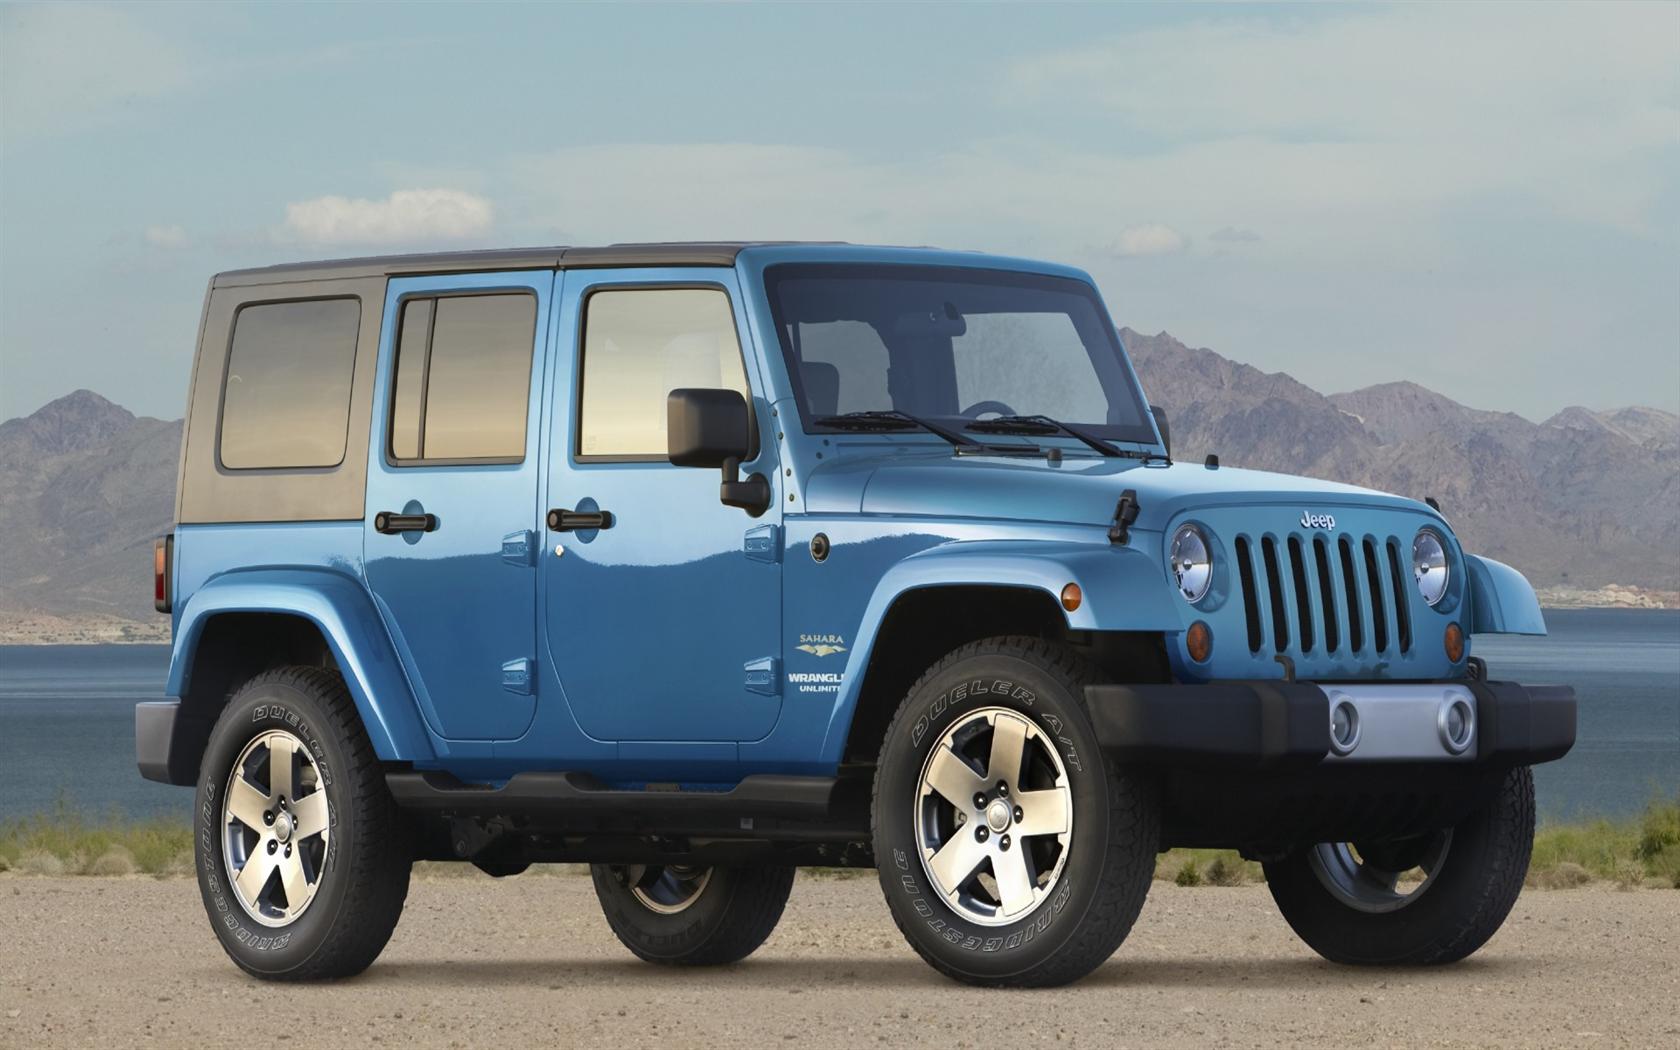 2010 Jeep Wrangler Unlimited Image. Photo 5 of 5